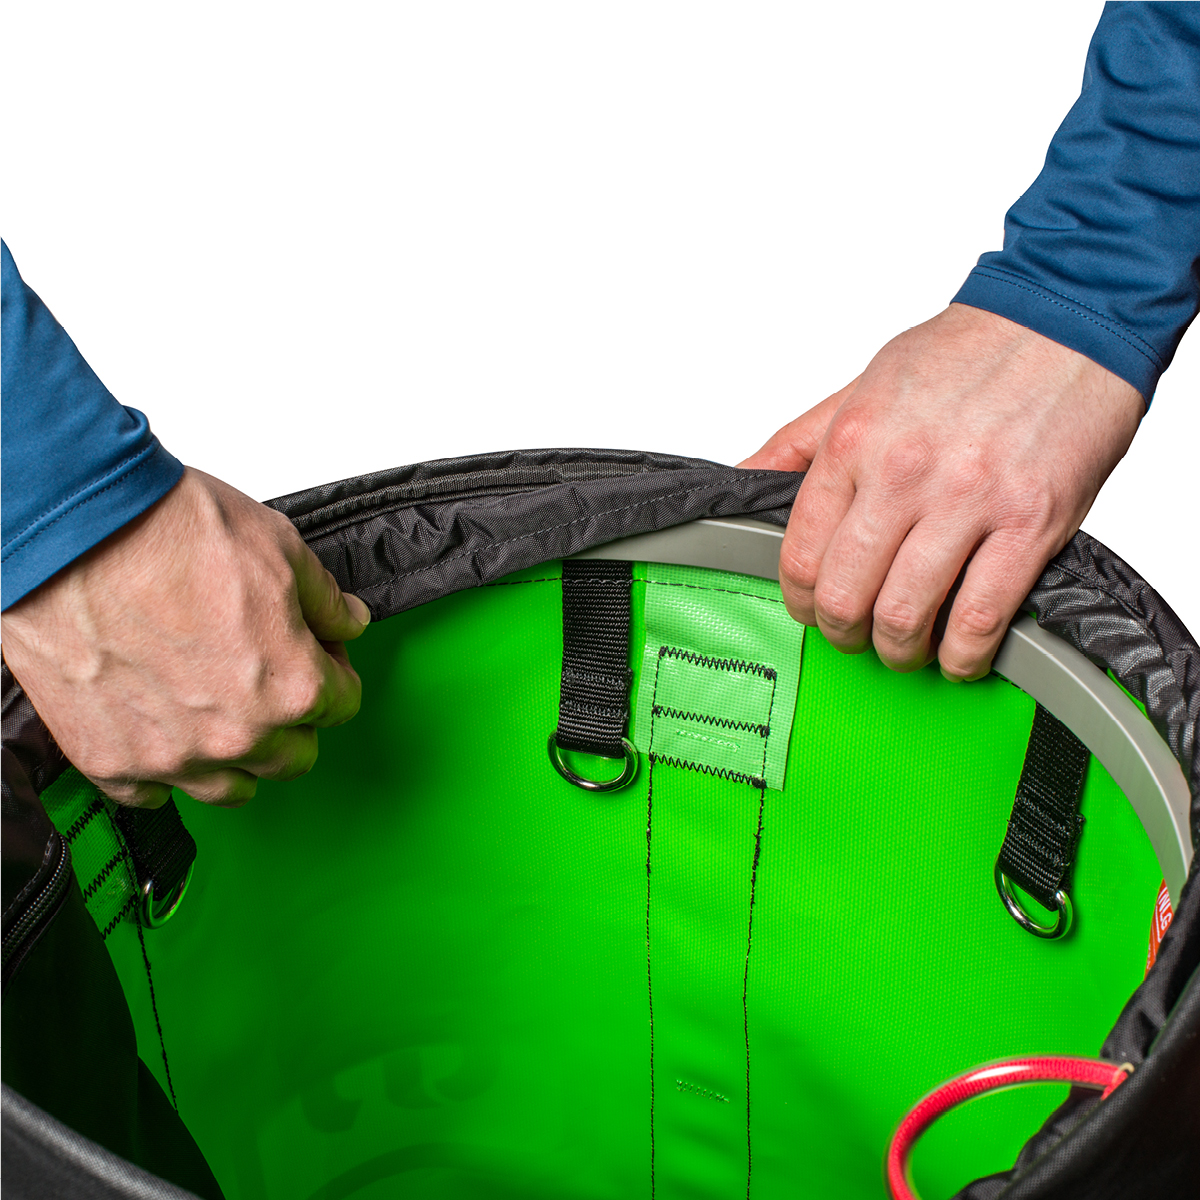 NLG Ascent Bucket from Columbia Safety